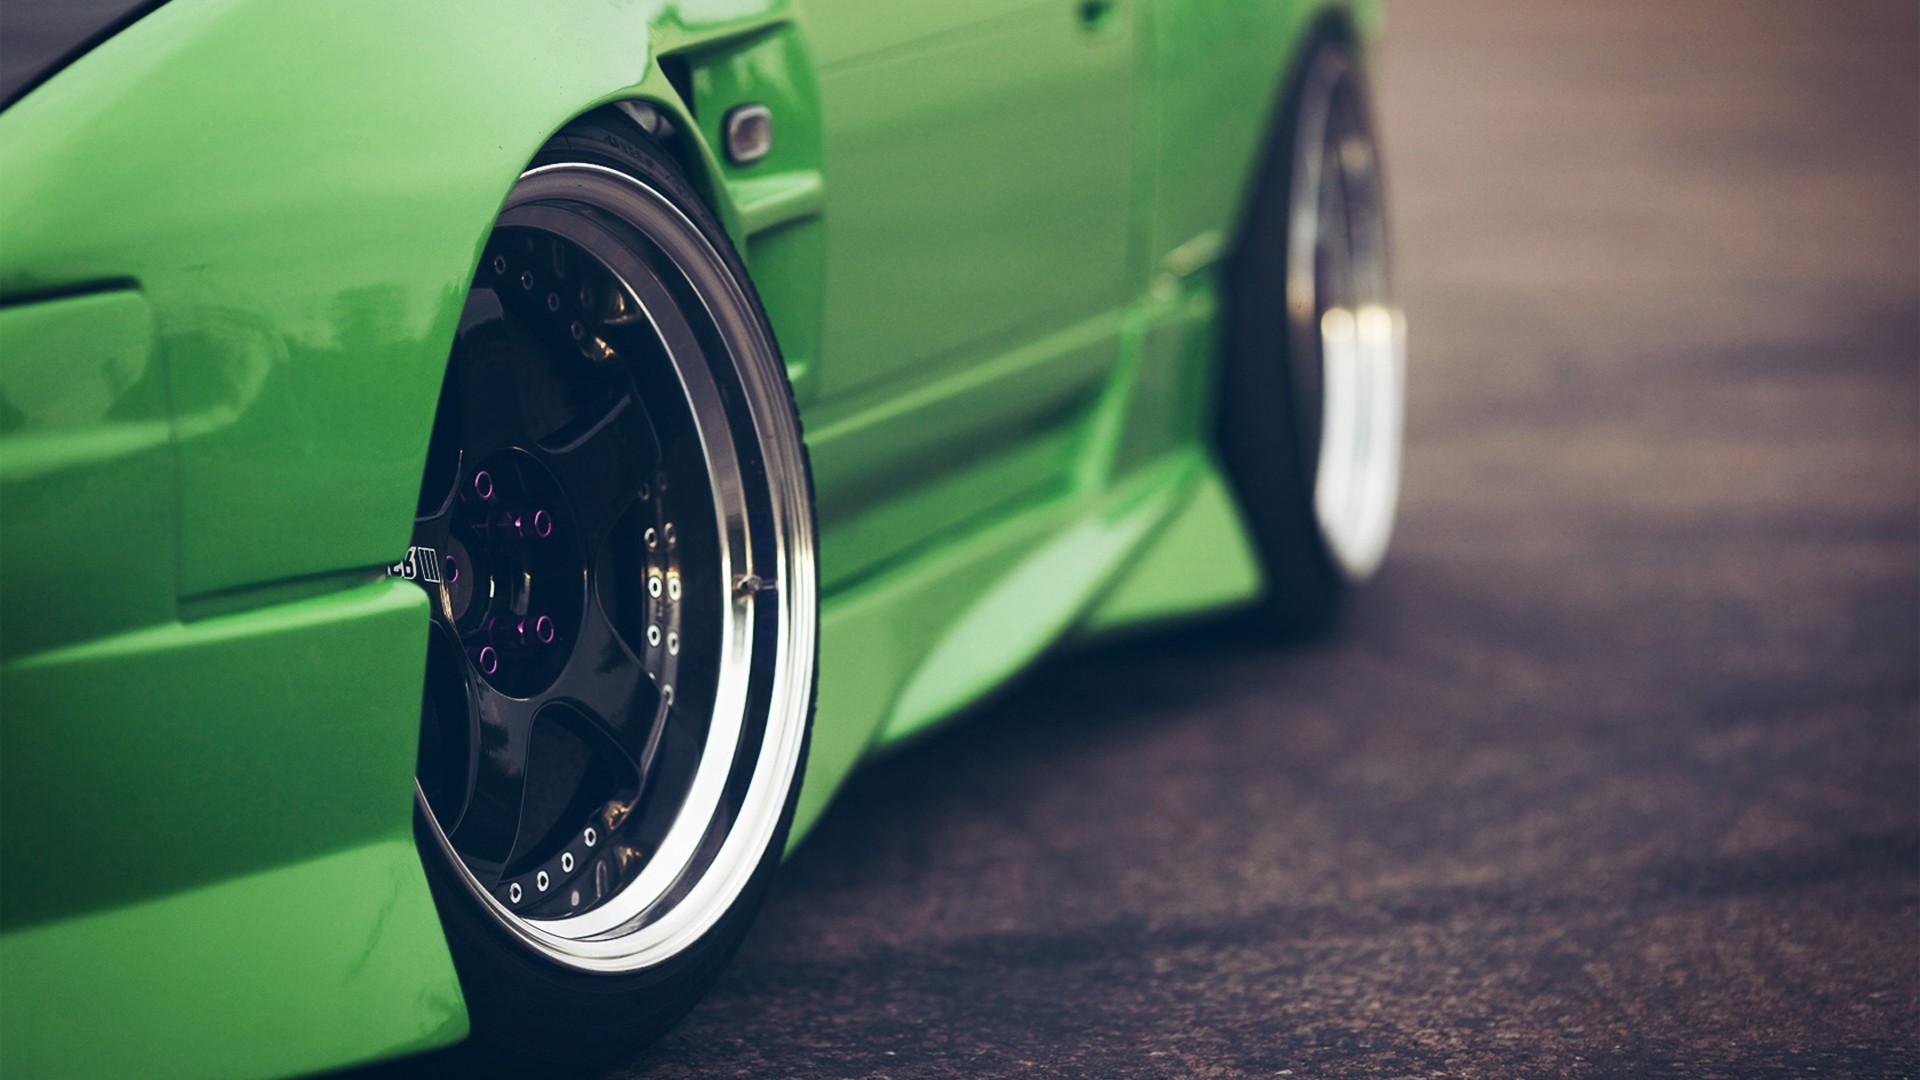 Nissan, 240sx, JDM, Car, Stance, Green Cars Wallpapers HD / Desktop and Mobile Backgrounds